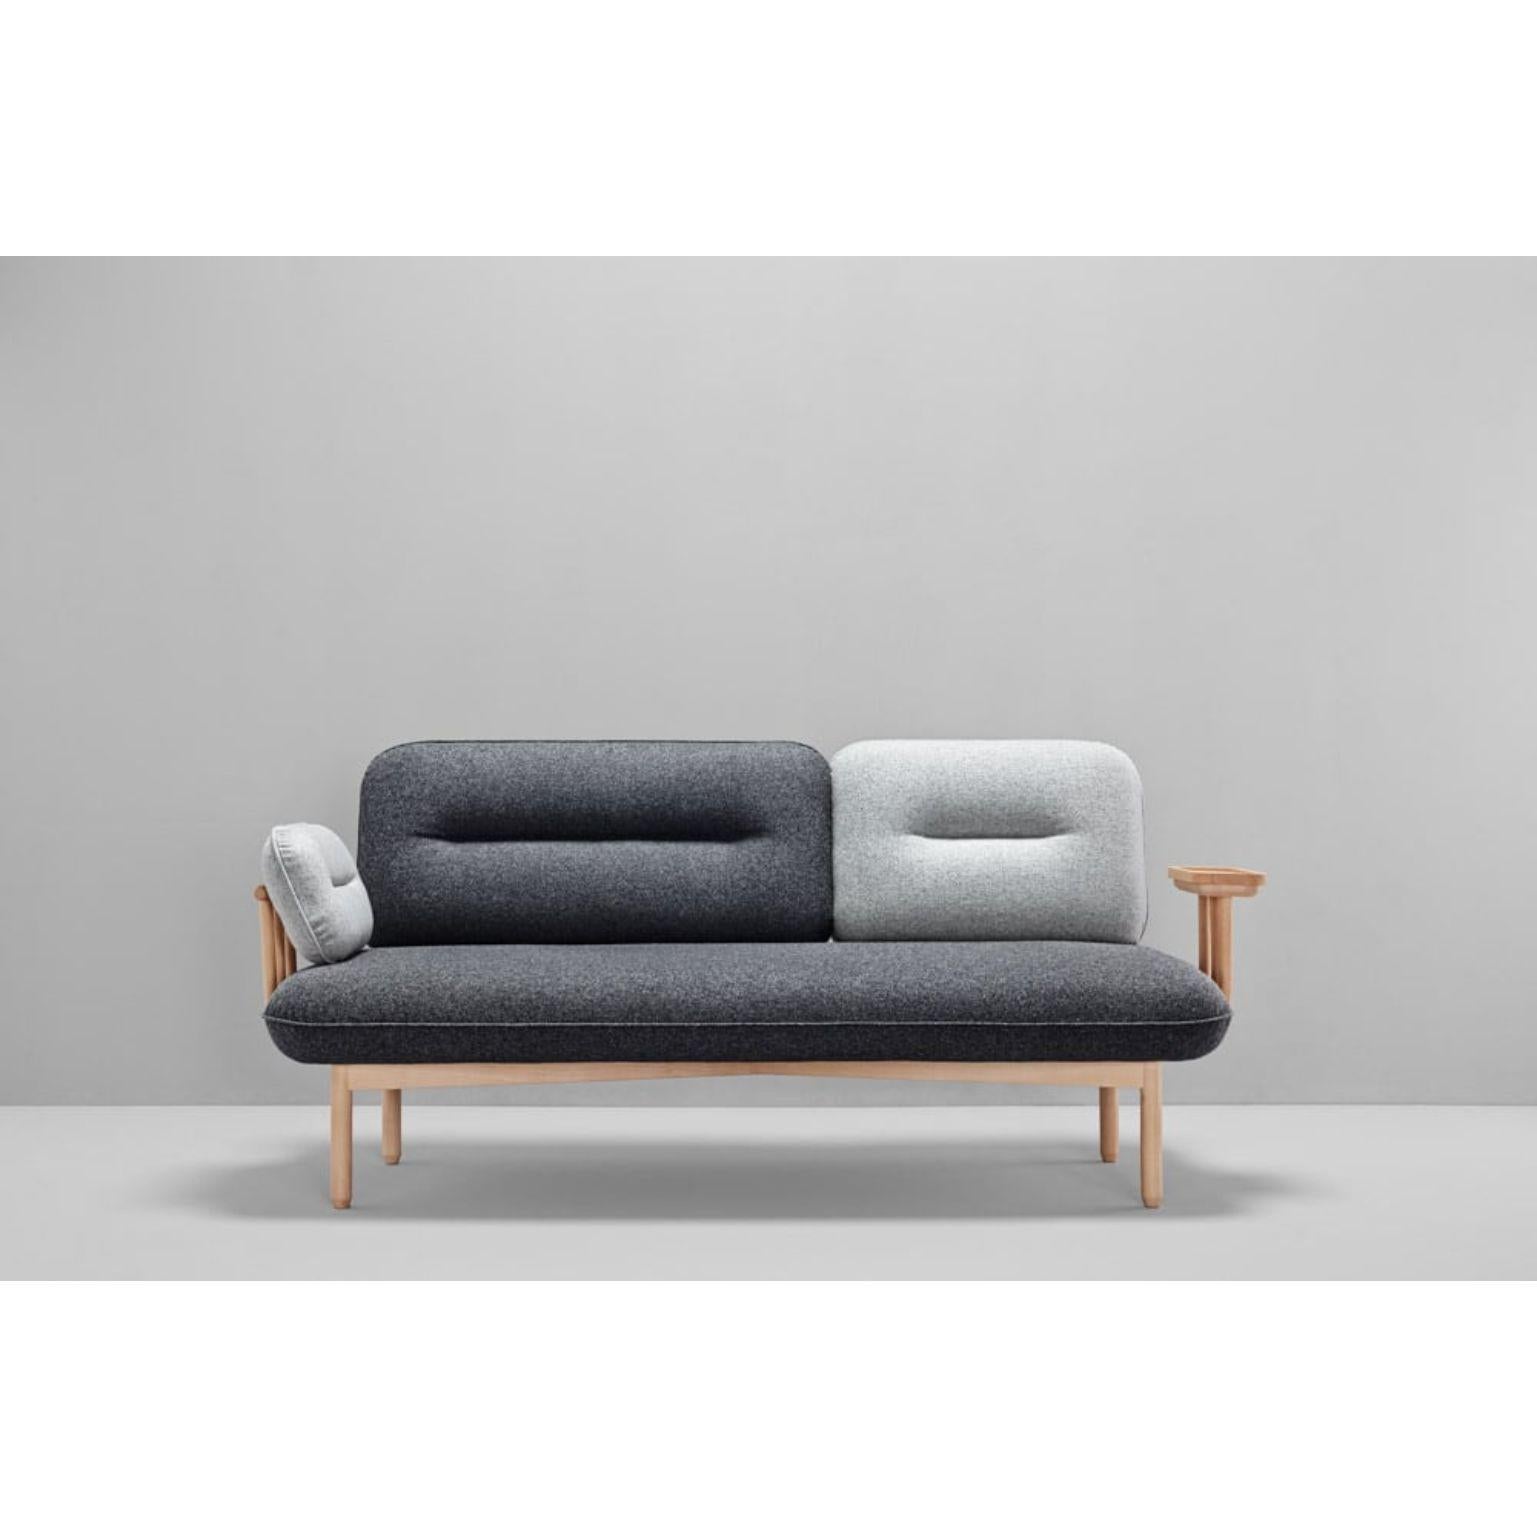 Gray Cosmo Sofa by Pepe Albargues
Dimensions: W 195, D 85, H 85, Seat45
Materials:Pine and beech wood structure reinforced with plywood
Arms and backrest frame treated with the steam bending technique
Foam CMHR (high resilience and flame retardant)